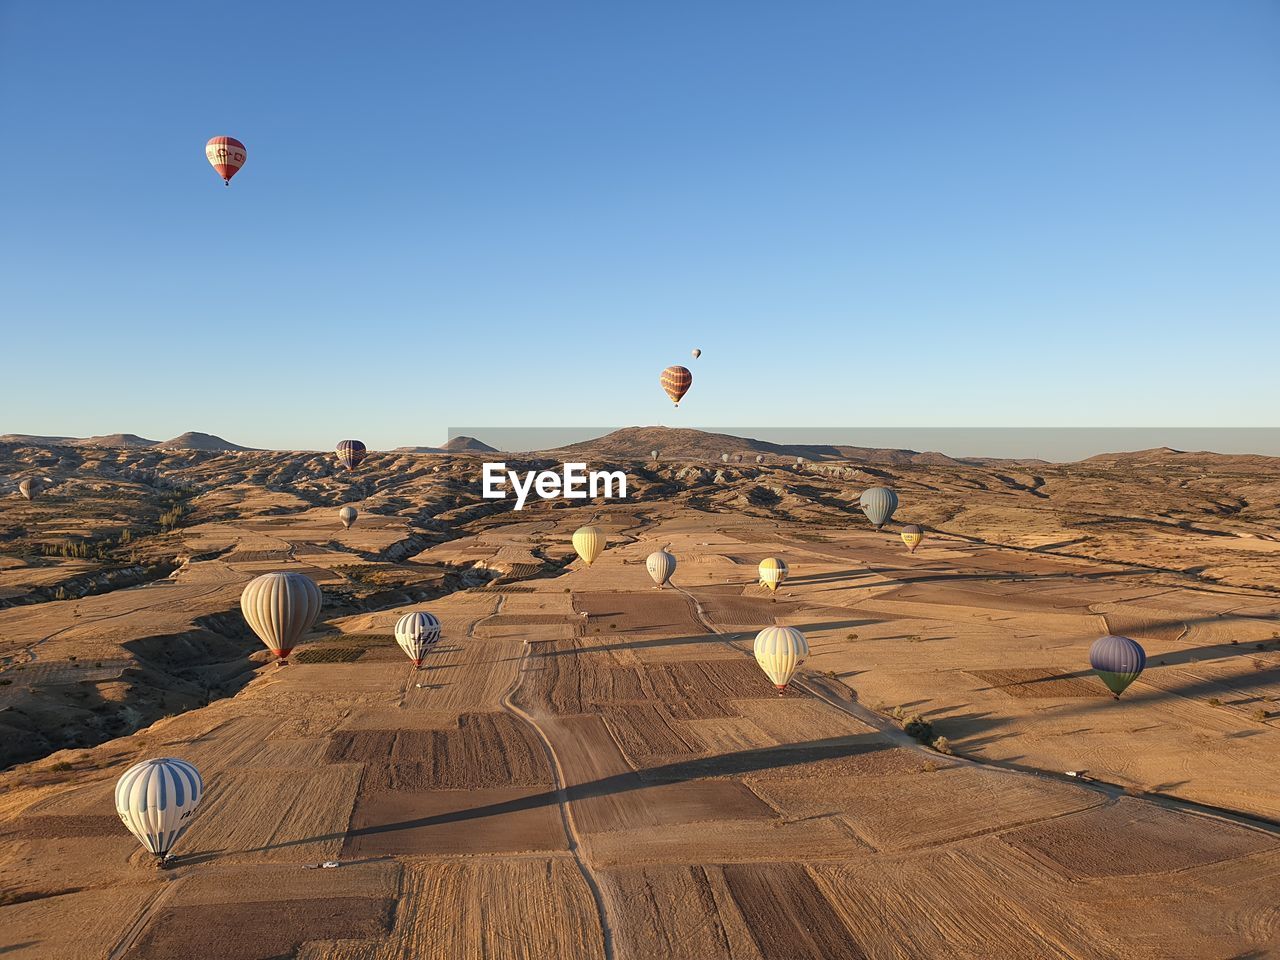 VIEW OF HOT AIR BALLOON FLYING OVER LAND